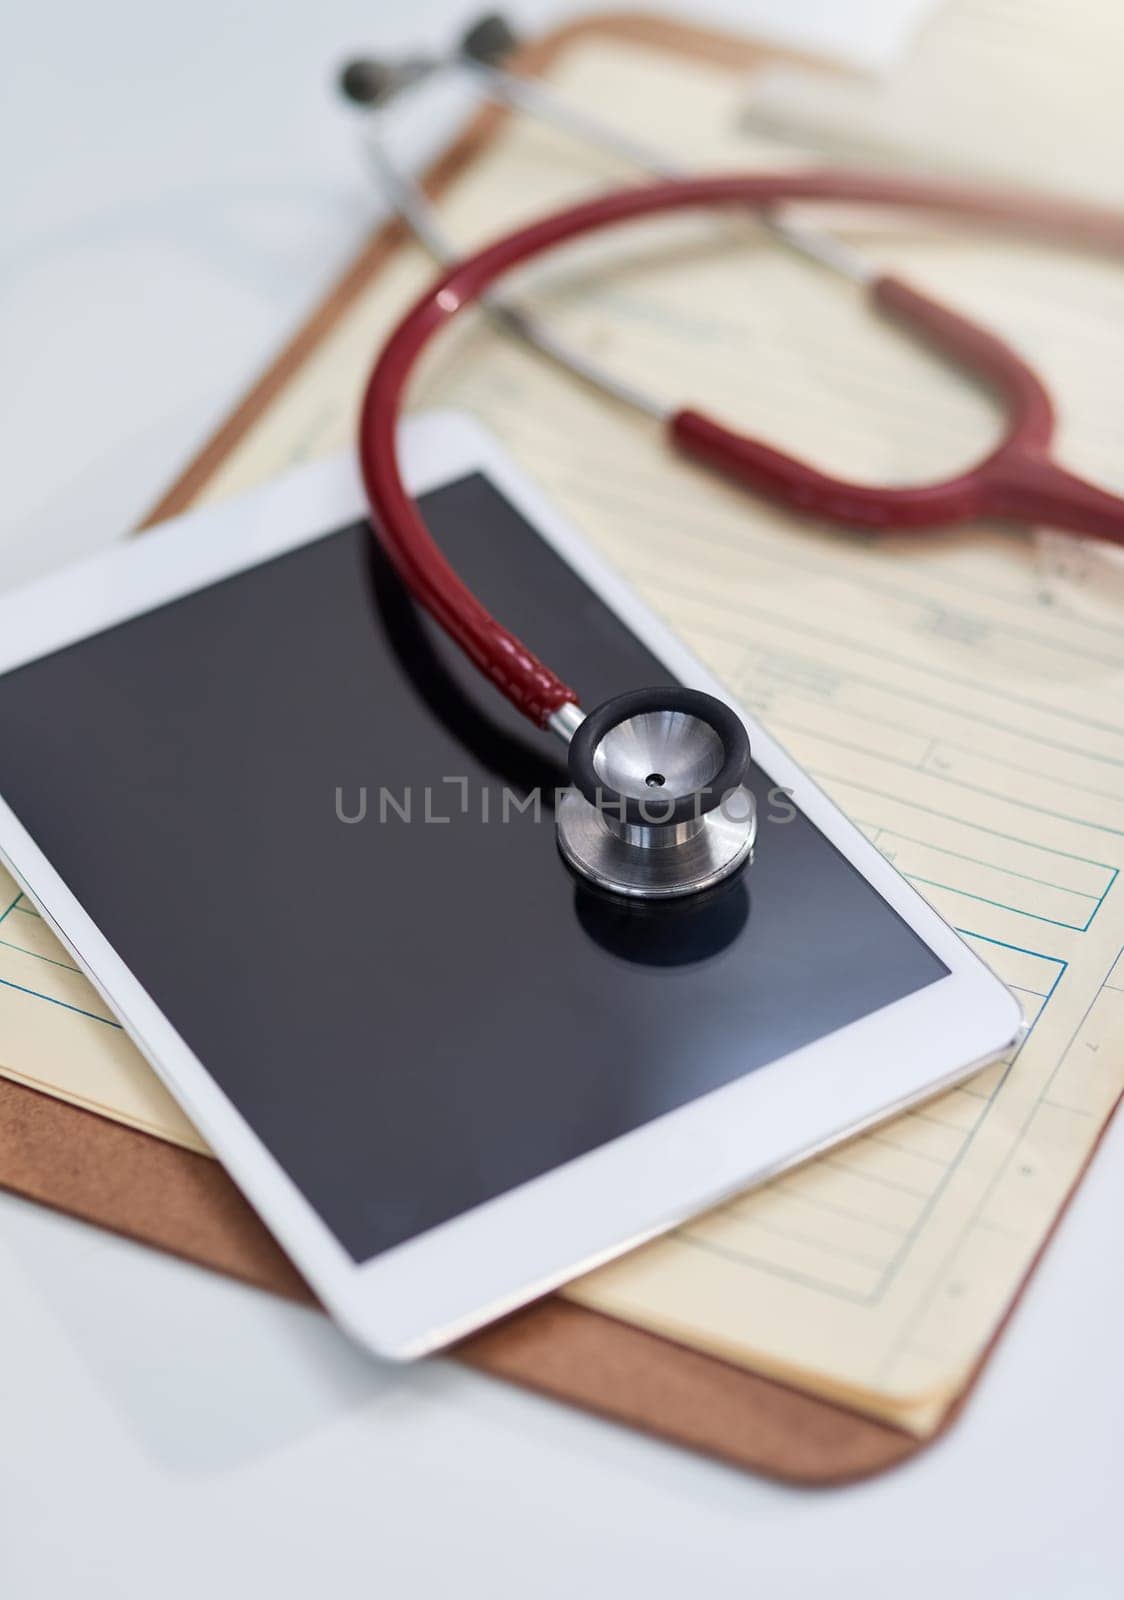 Hospital, clinic and tablet with stethoscope on desk for medical website, telehealth and research. Healthcare, cardiology and digital tech, equipment and clipboard for online consulting service.